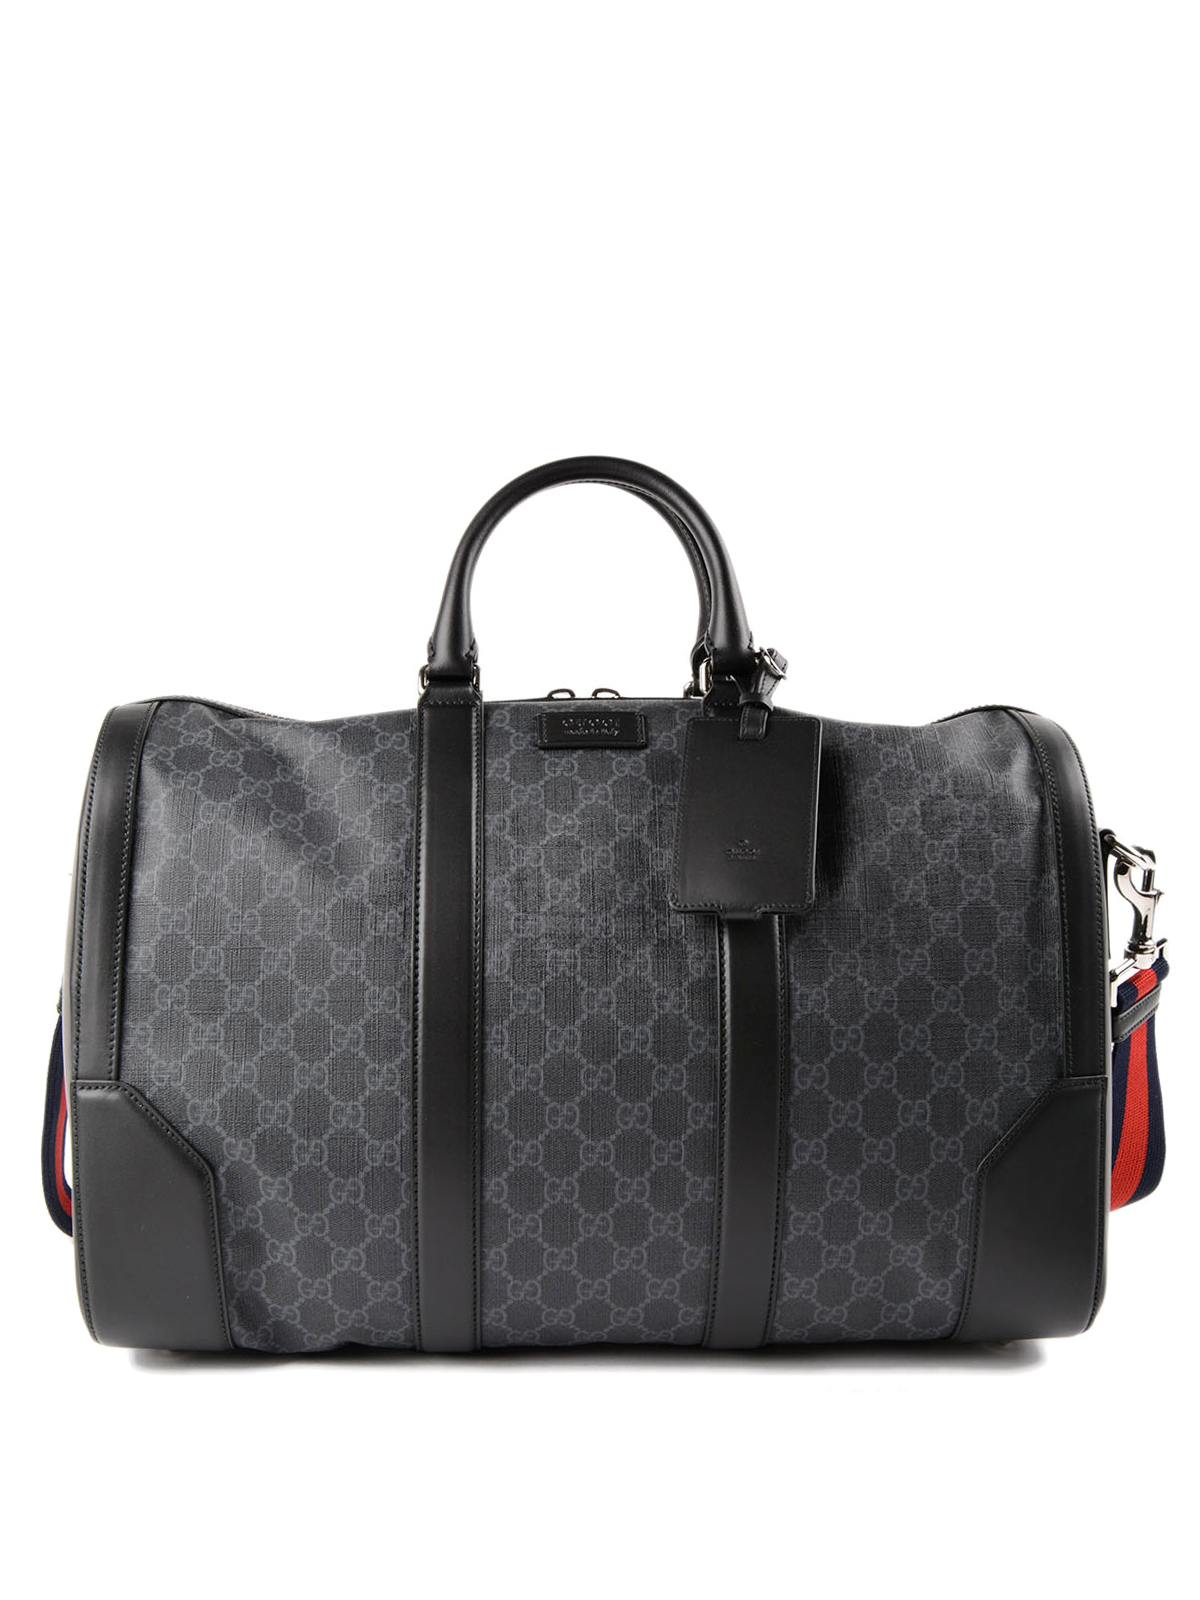 Gucci Travel Bags for Men